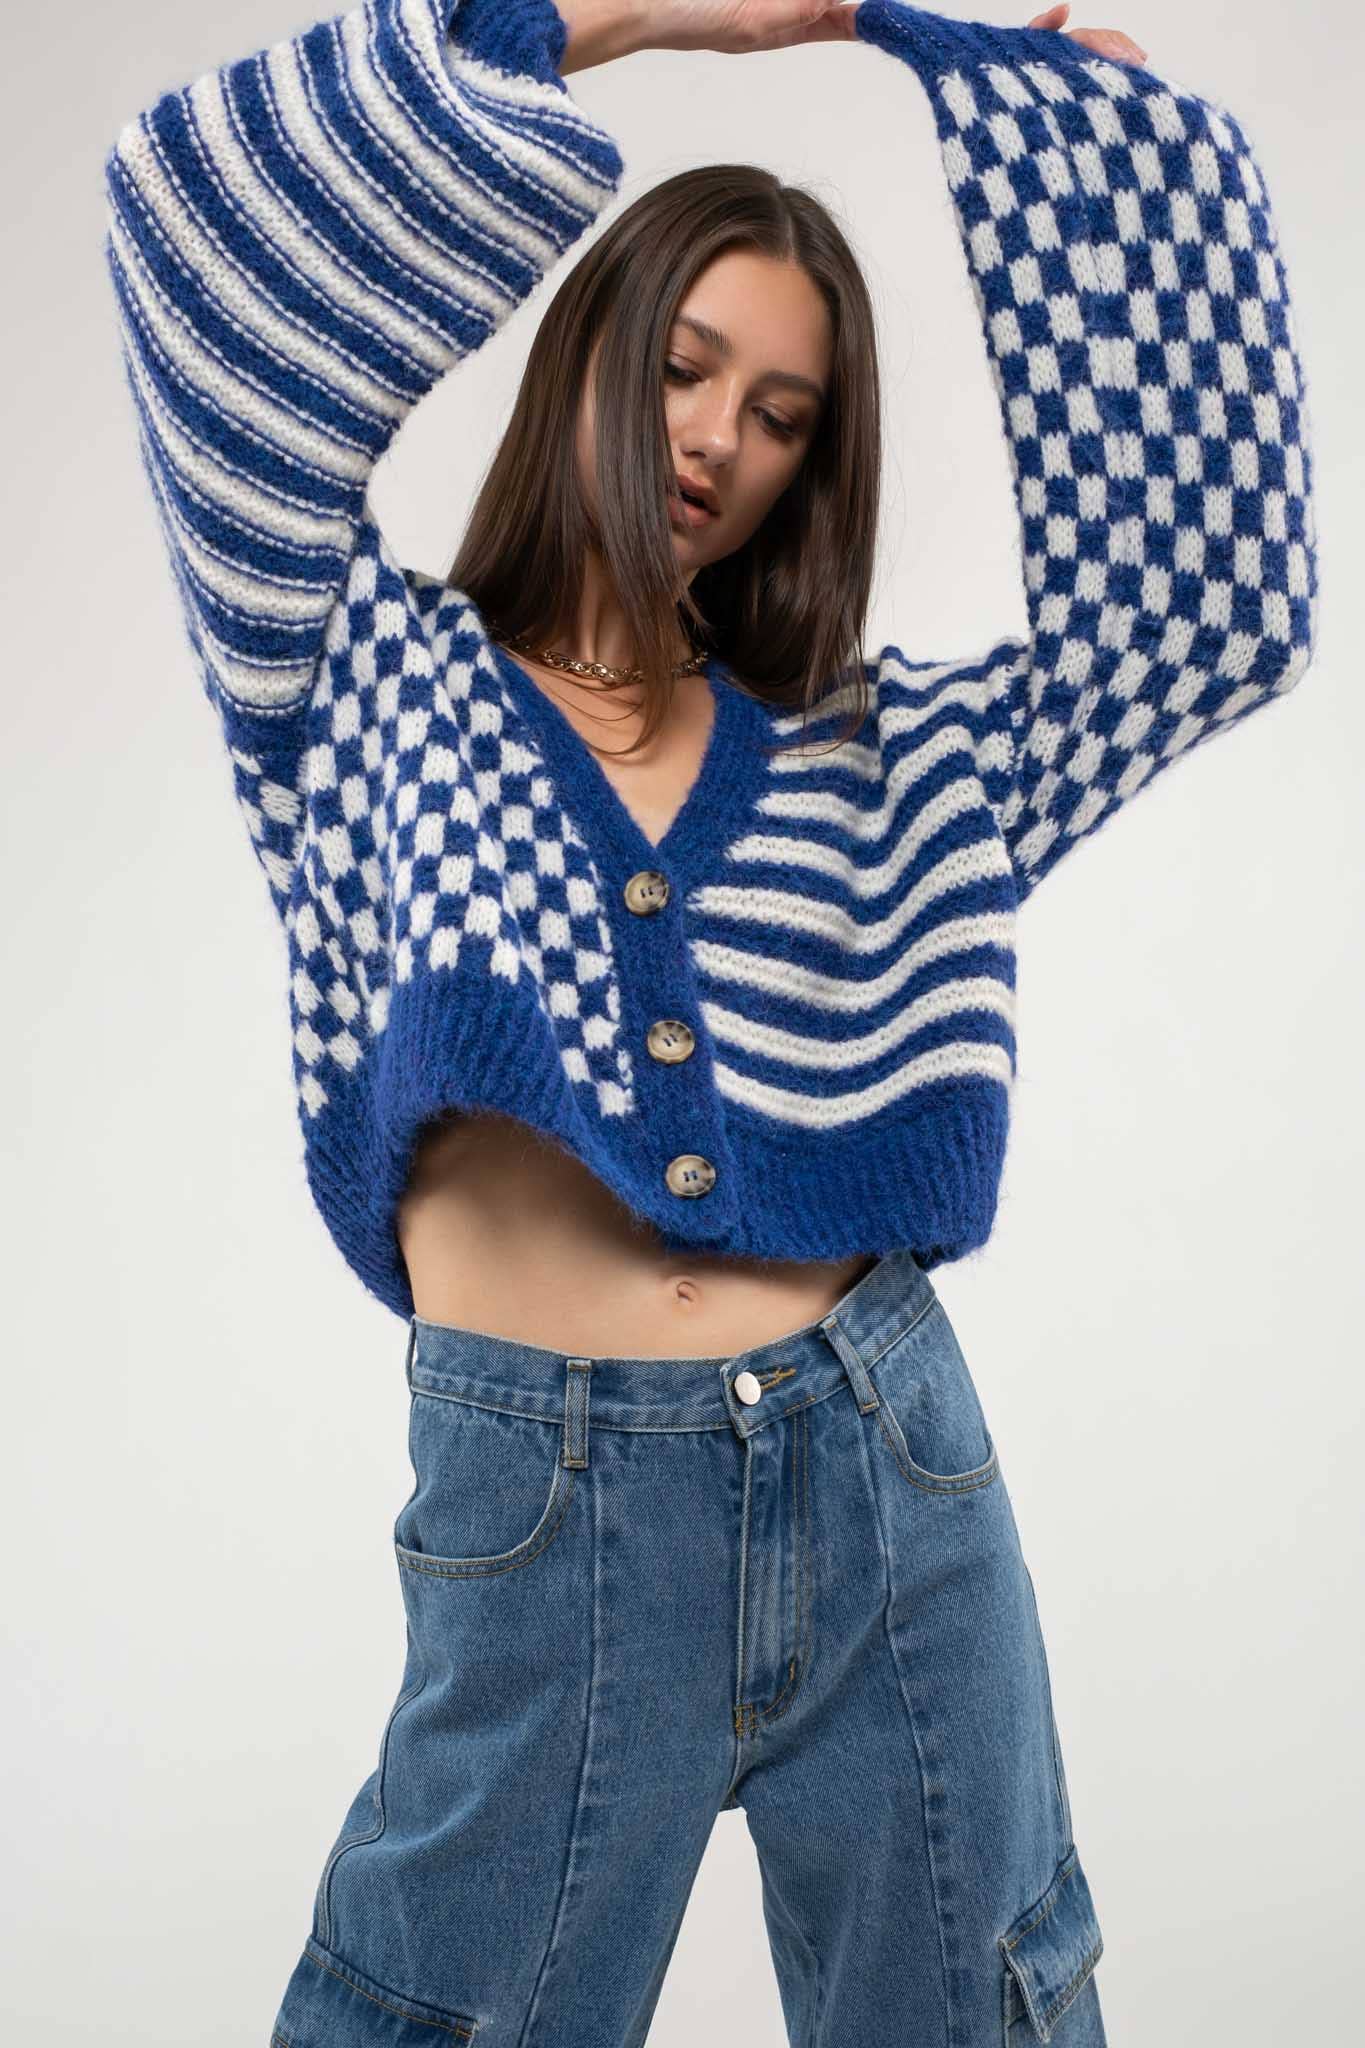 STRIPED AND CHECKERED CARDIGAN: ROYAL BLUE